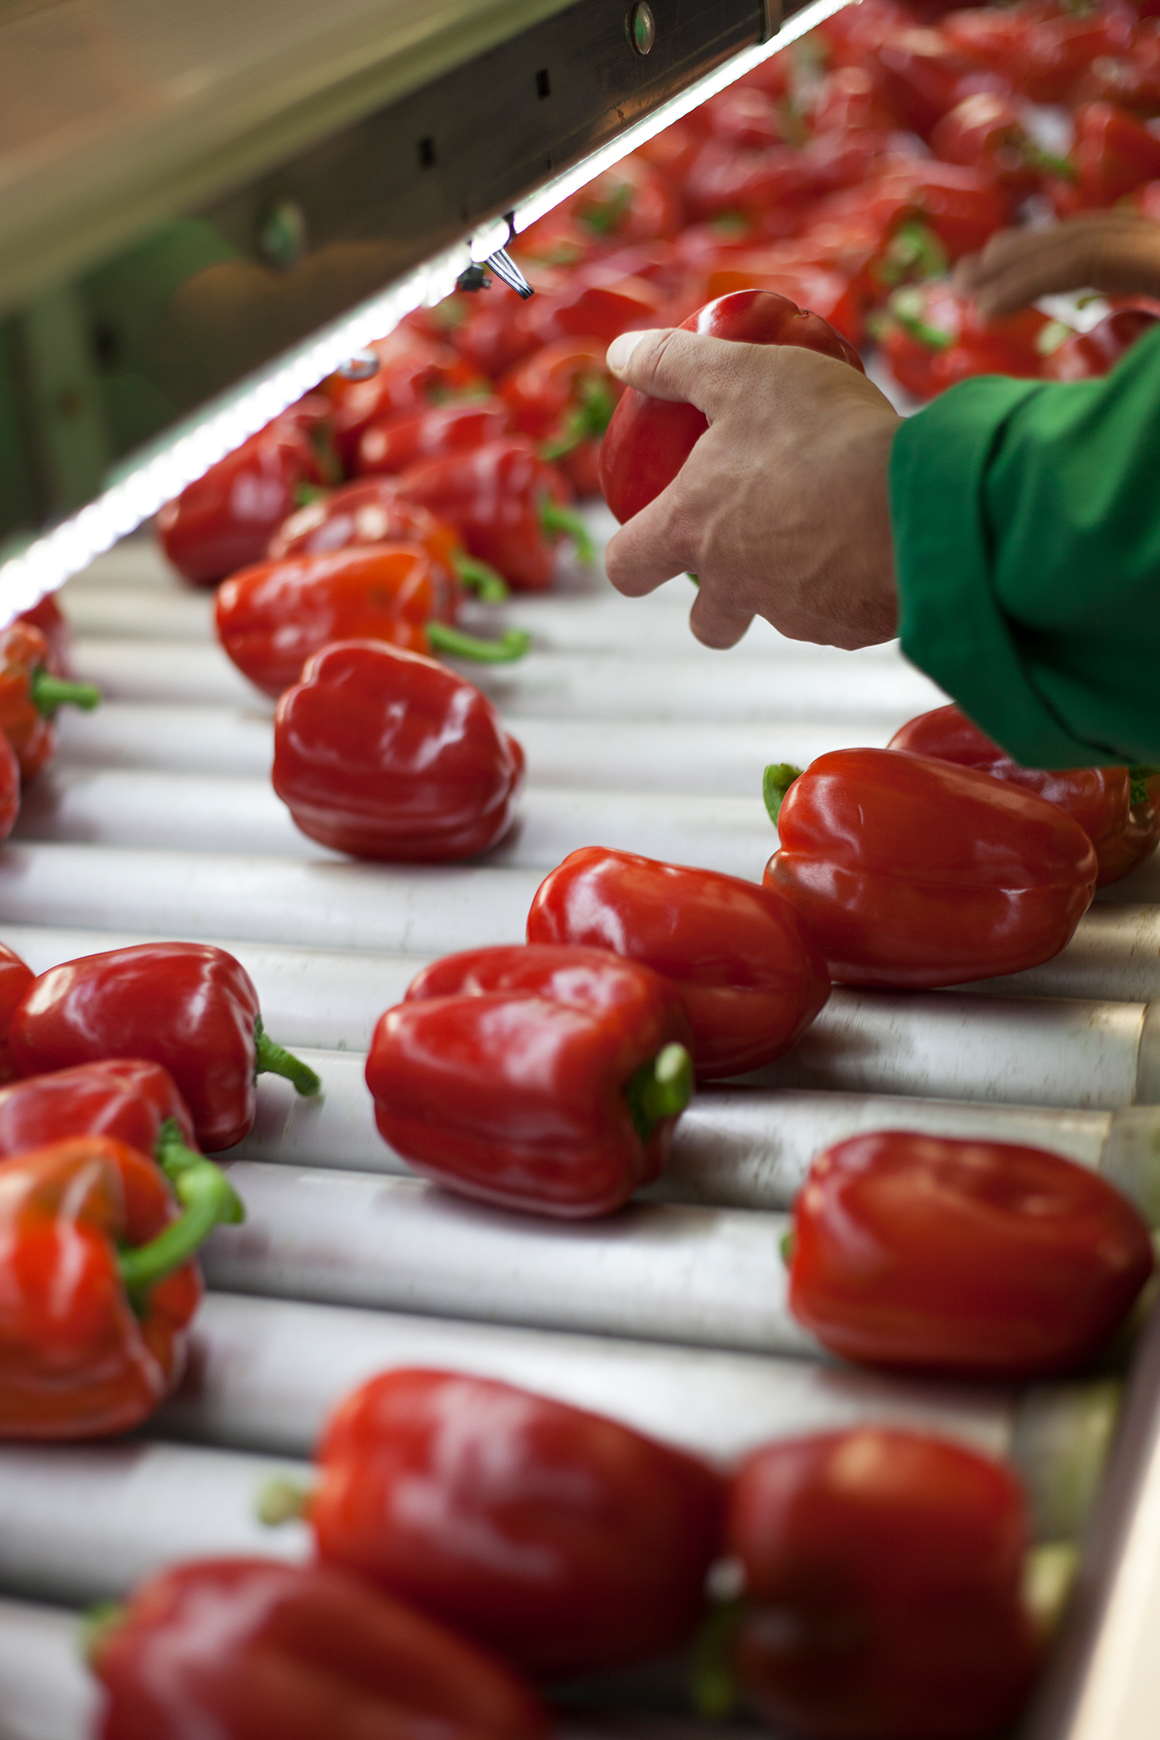 An employee checking ever pepper by hand.